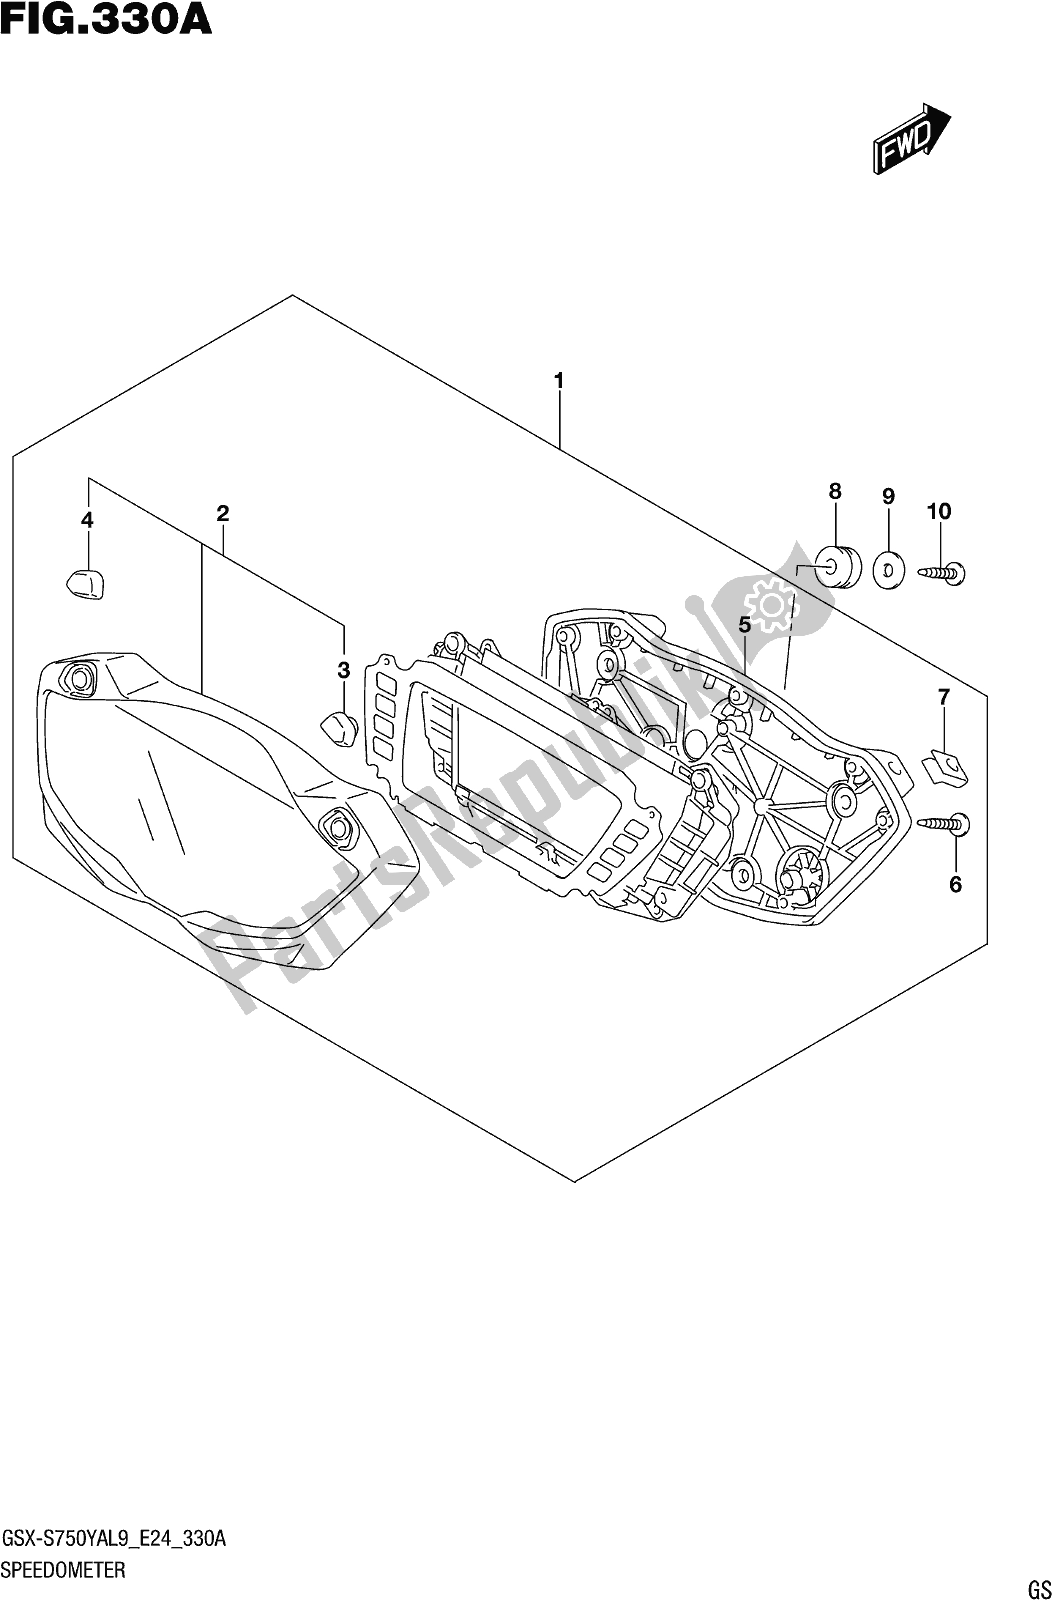 All parts for the Fig. 330a Speedometer of the Suzuki Gsx-s 750 ZA 2019